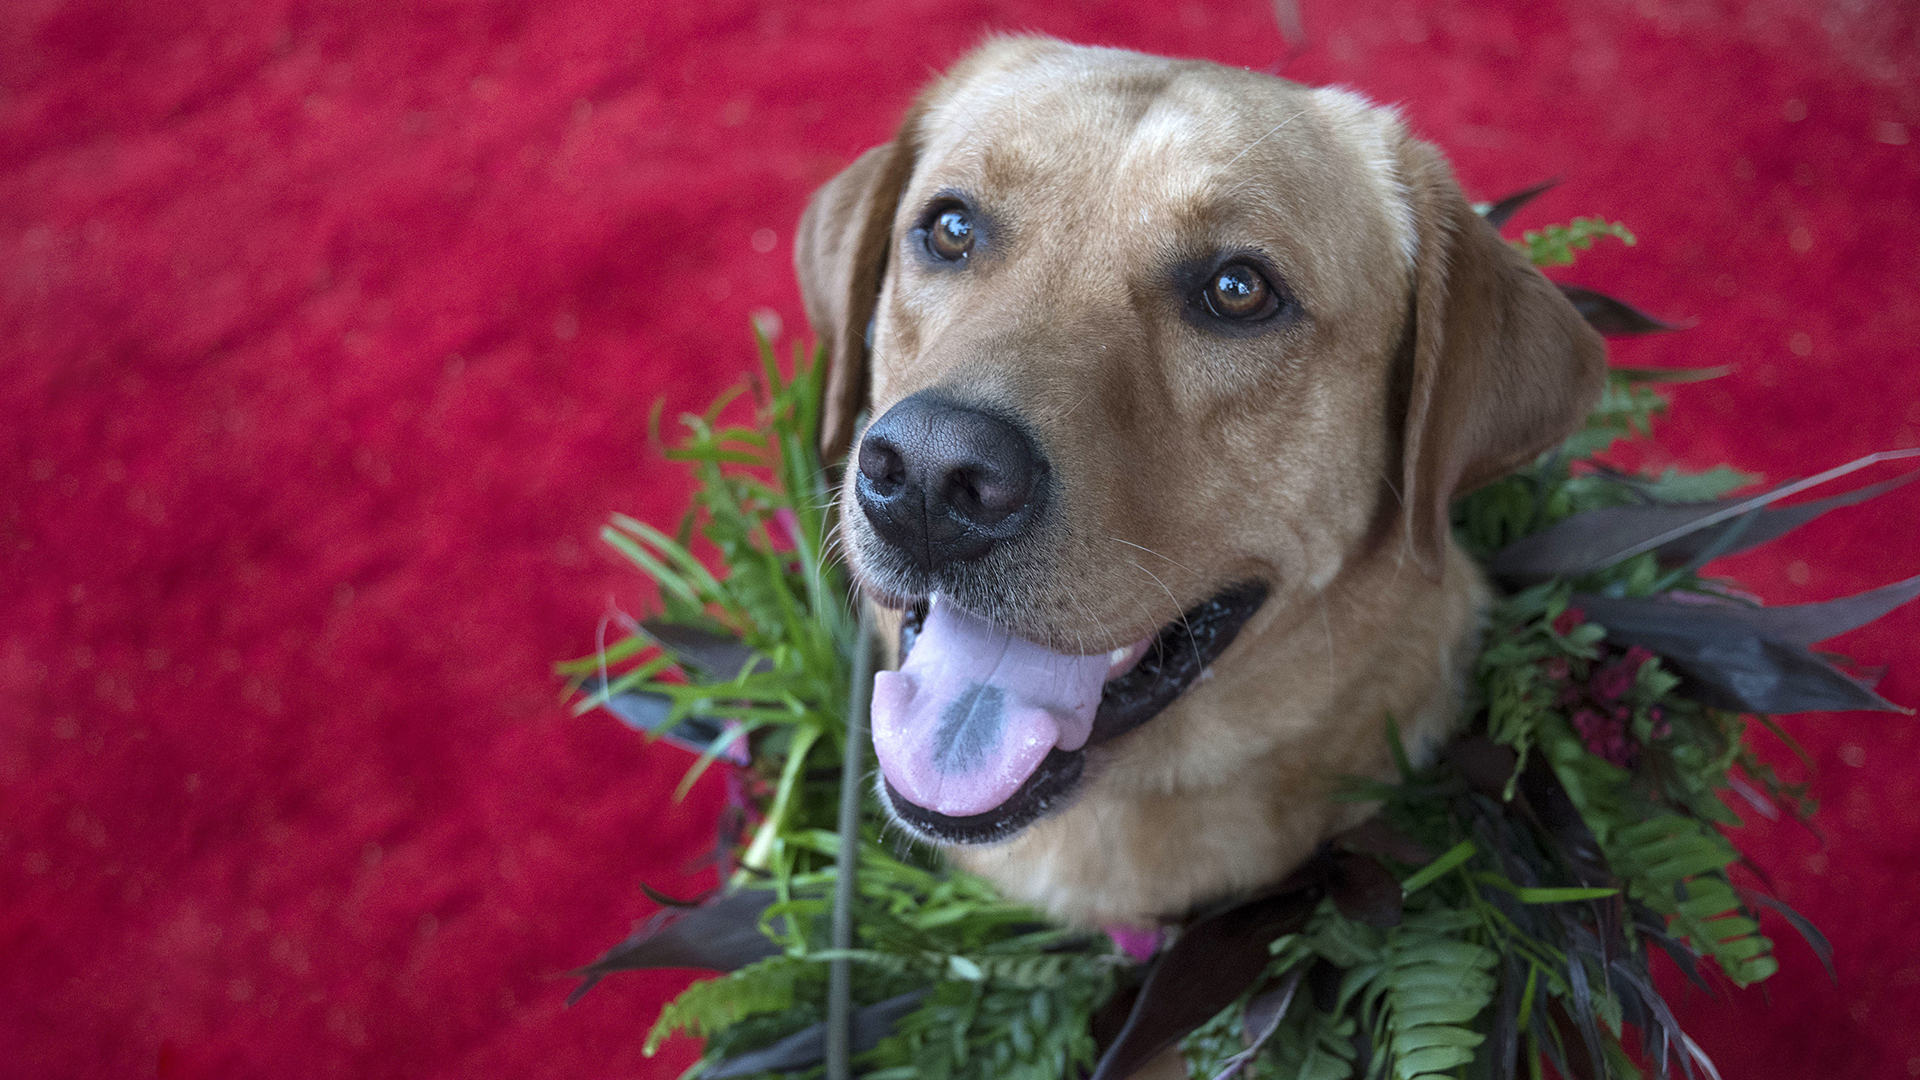 Eddie the police dog couldn't be happier on the red carpet.